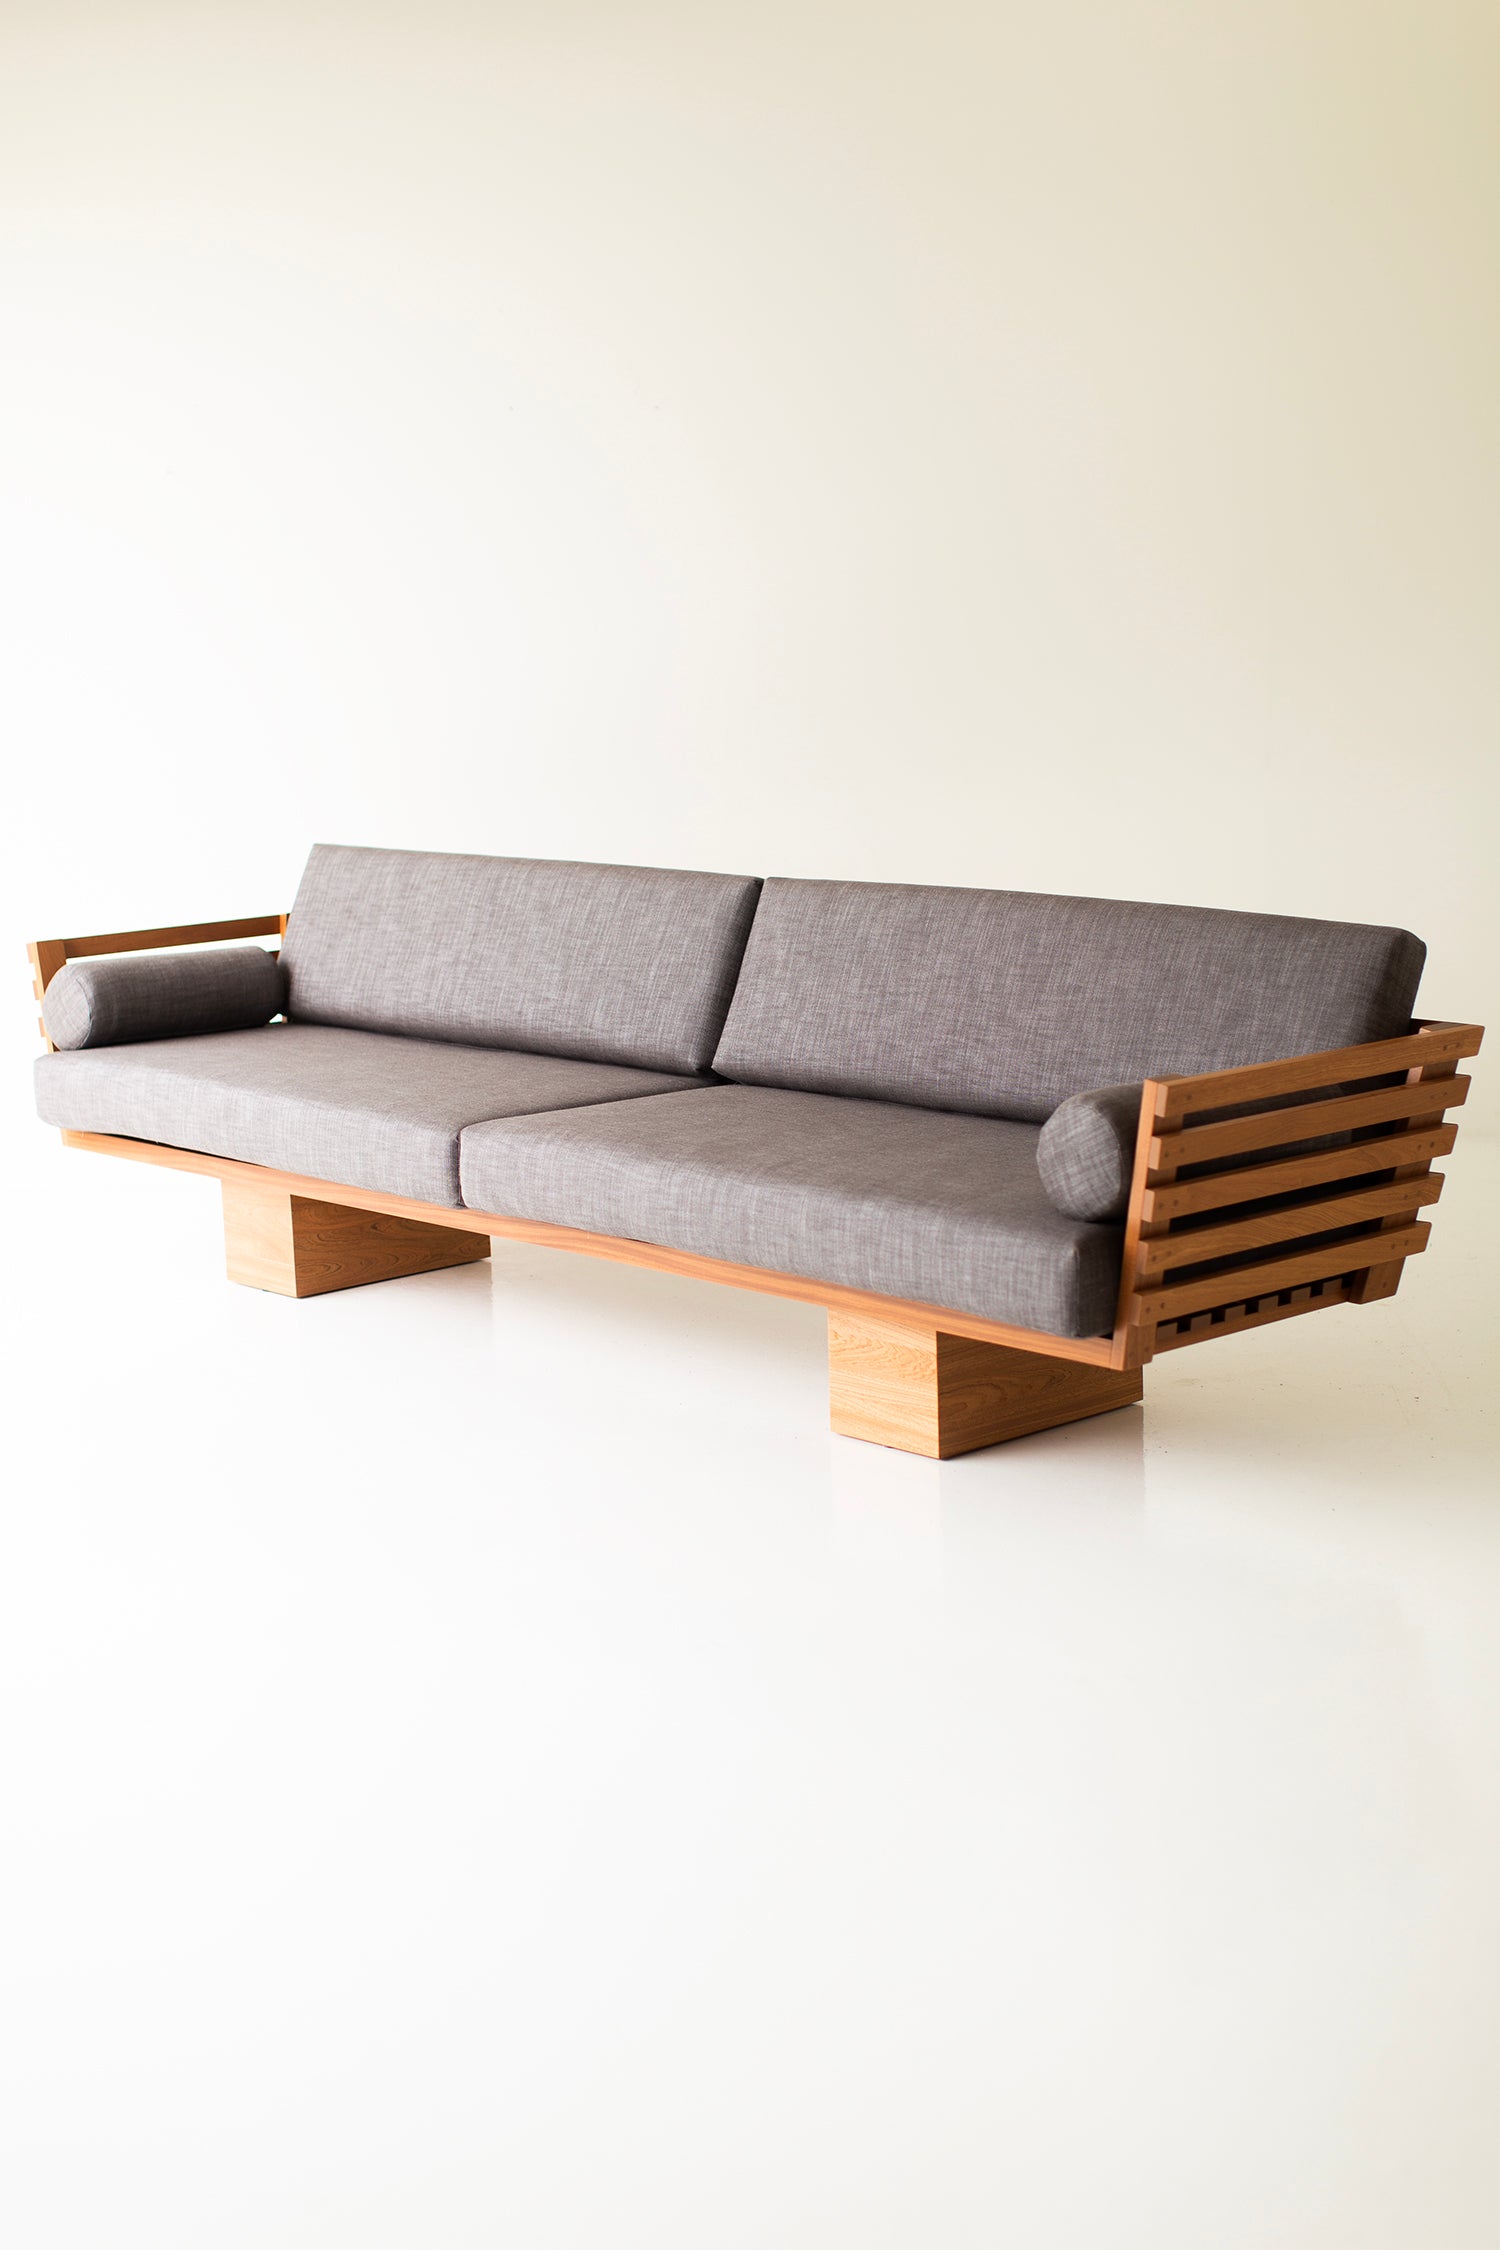 Large Outdoor Slatted Suelo Sofa - 4823